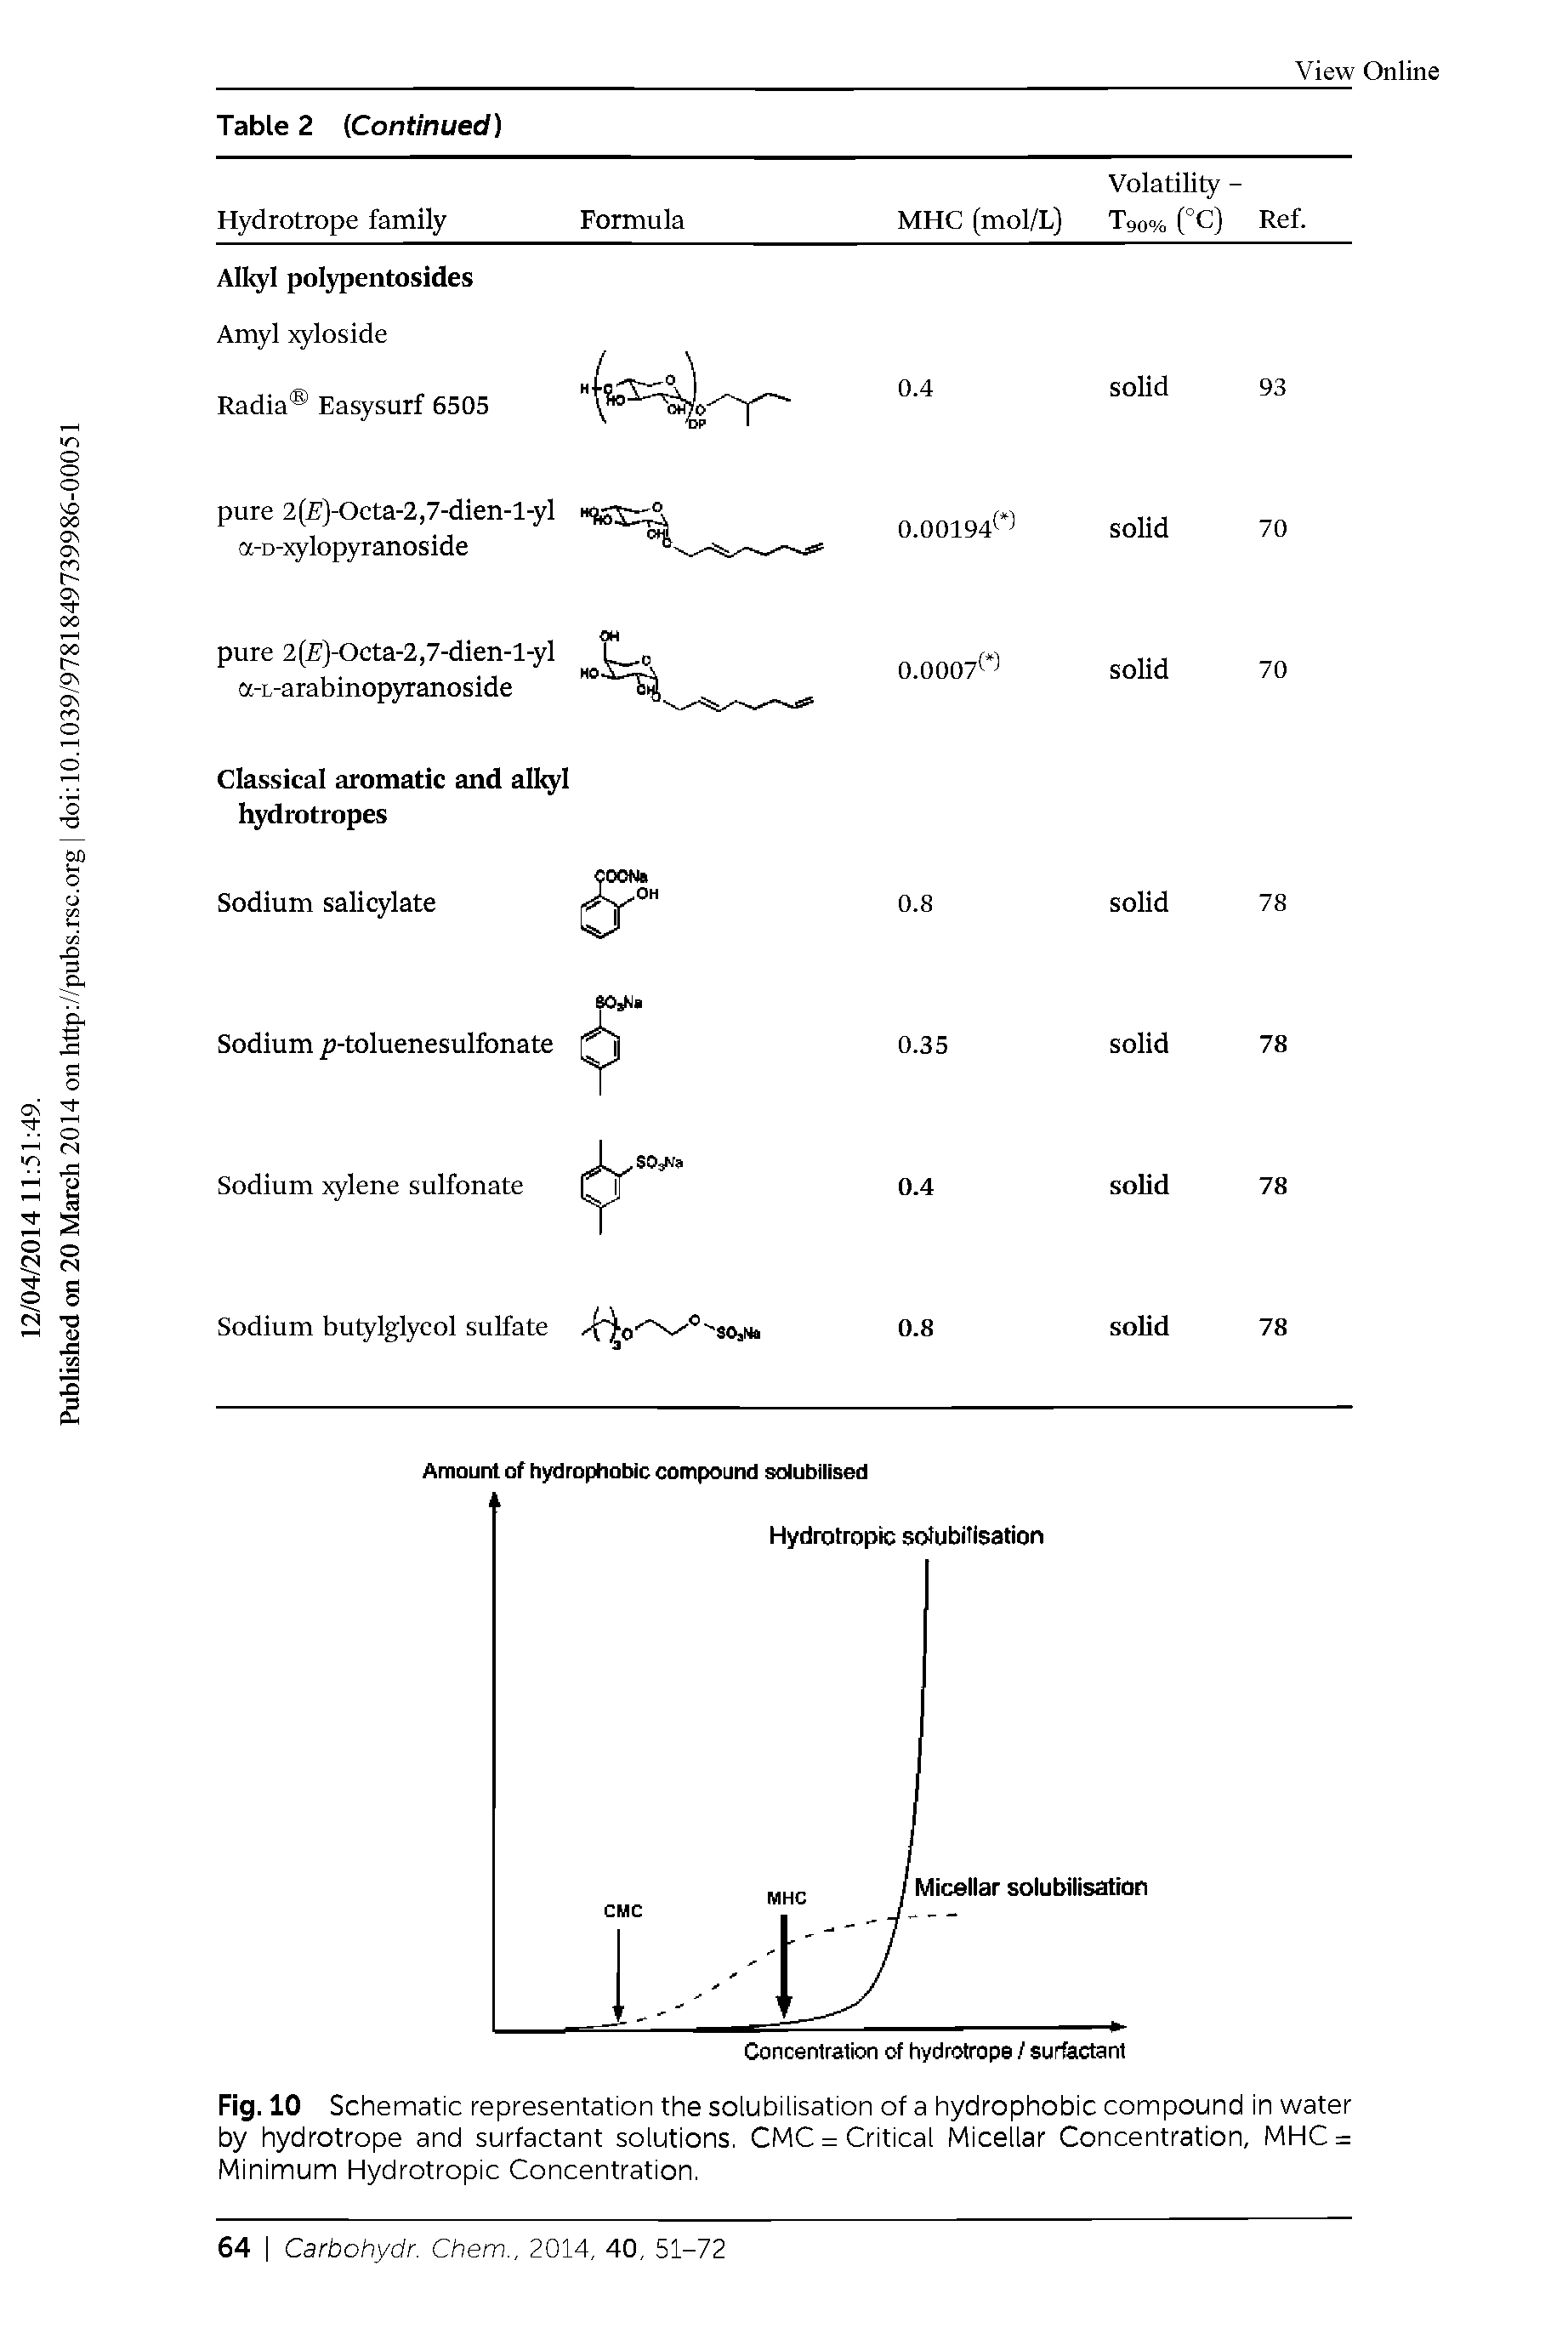 Fig. 10 Schematic representation the solubilisation of a hydrophobic compound in water by hydrotrope and surfactant solutions. CMC = Critical Micellar Concentration, MHC = Minimum Hydrotropic Concentration.